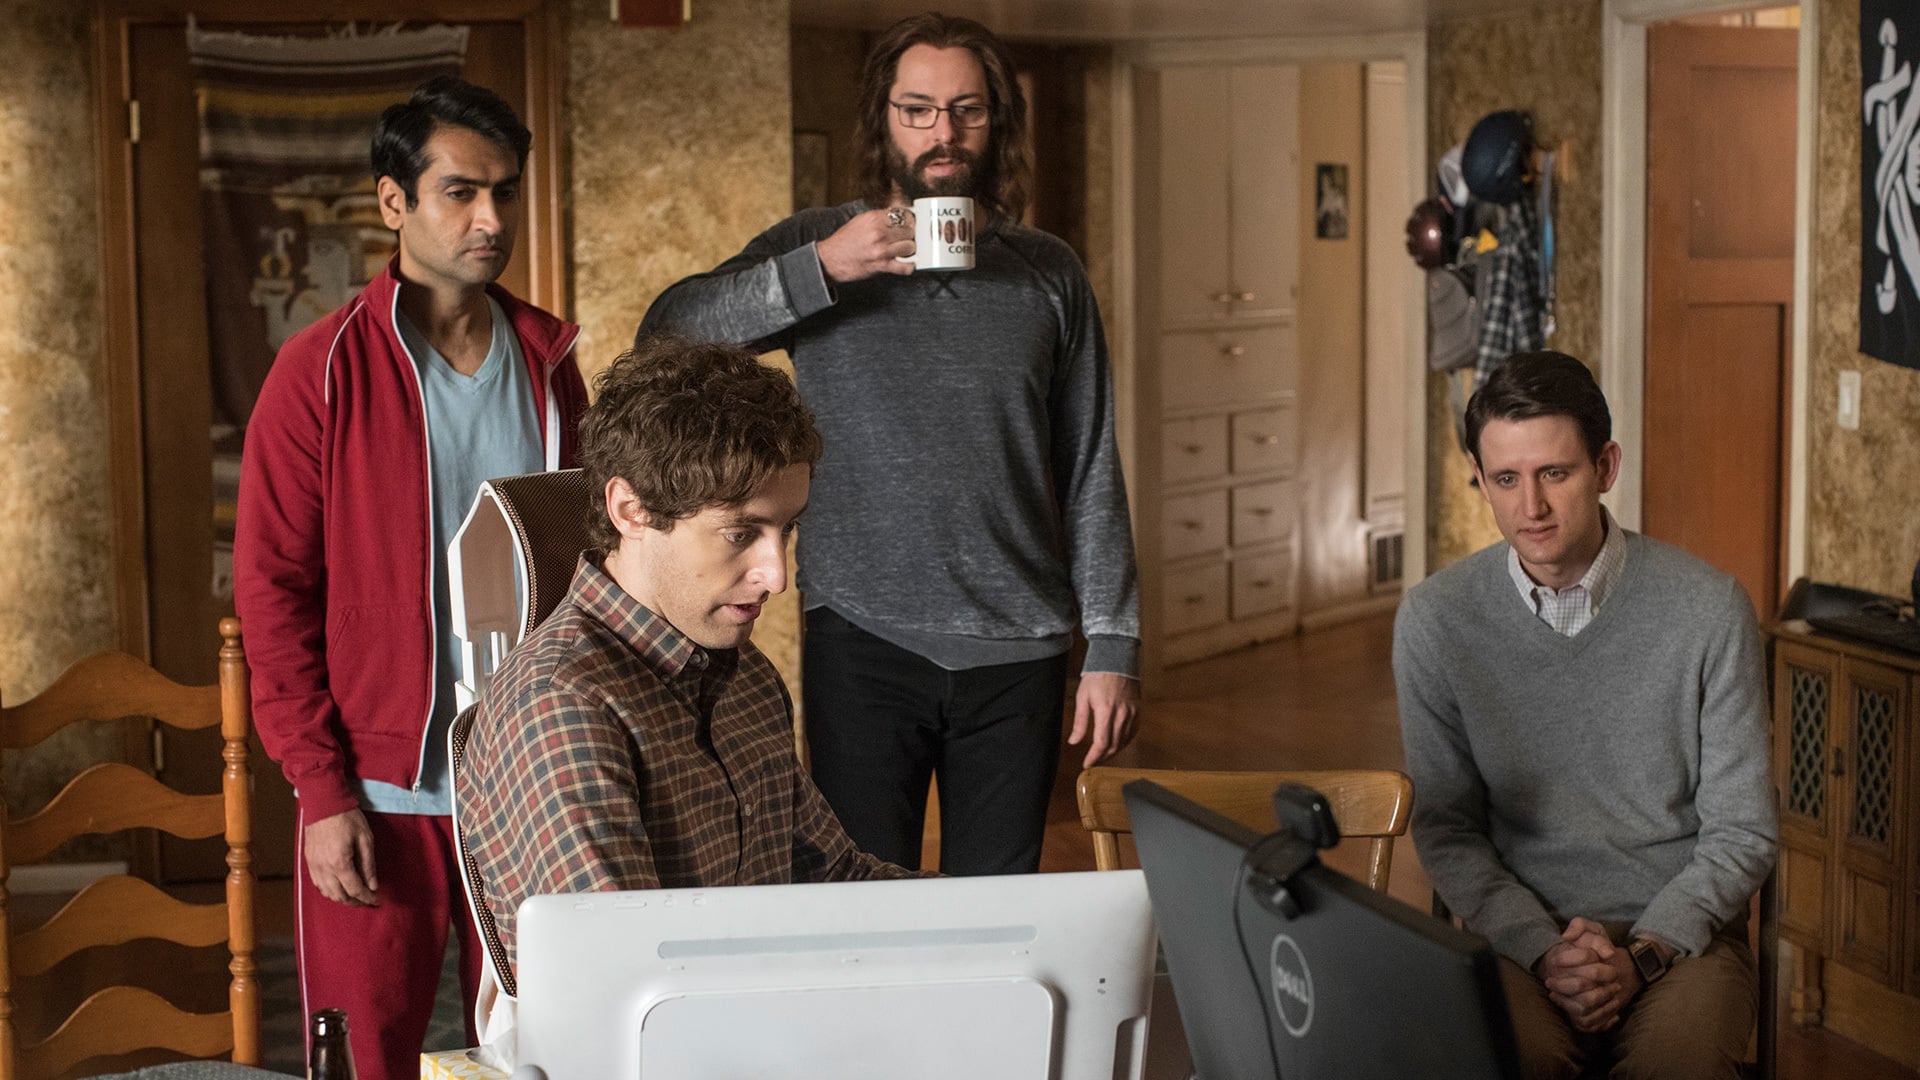 Image Silicon Valley (2014) 1